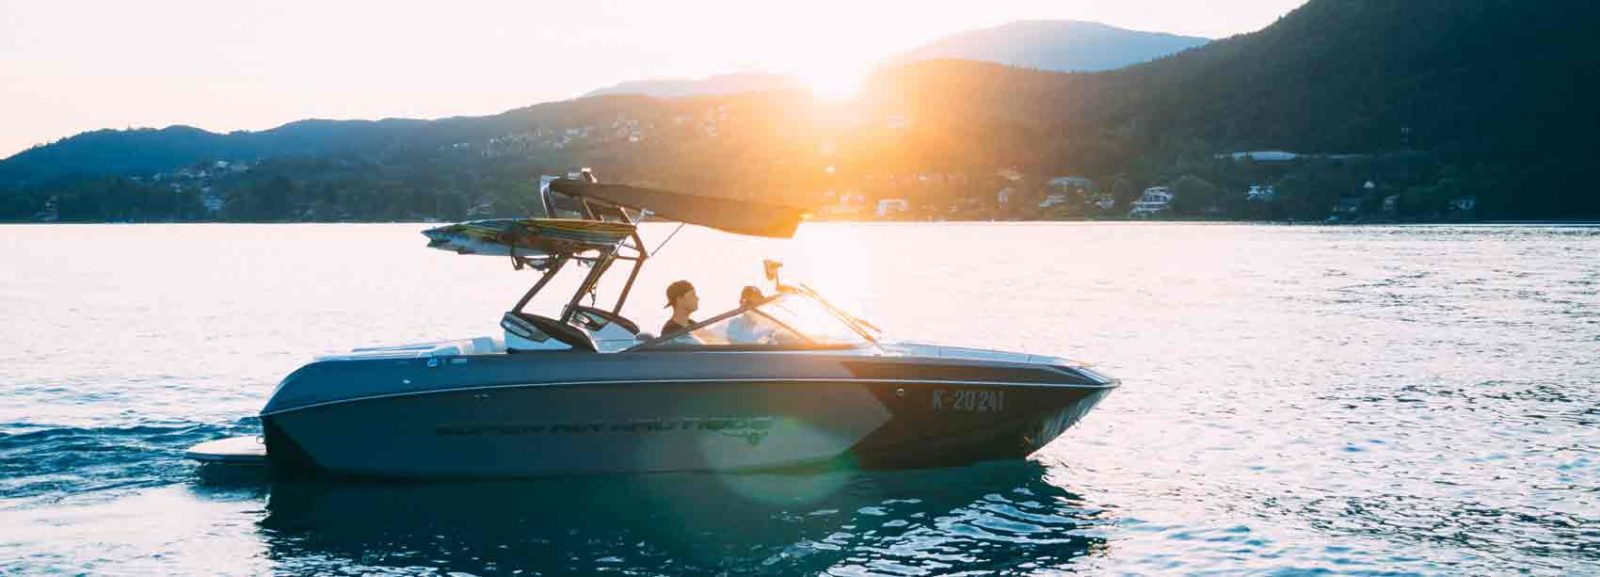 6 Boating Safety Tips You Need to Know to Avoid an Accident